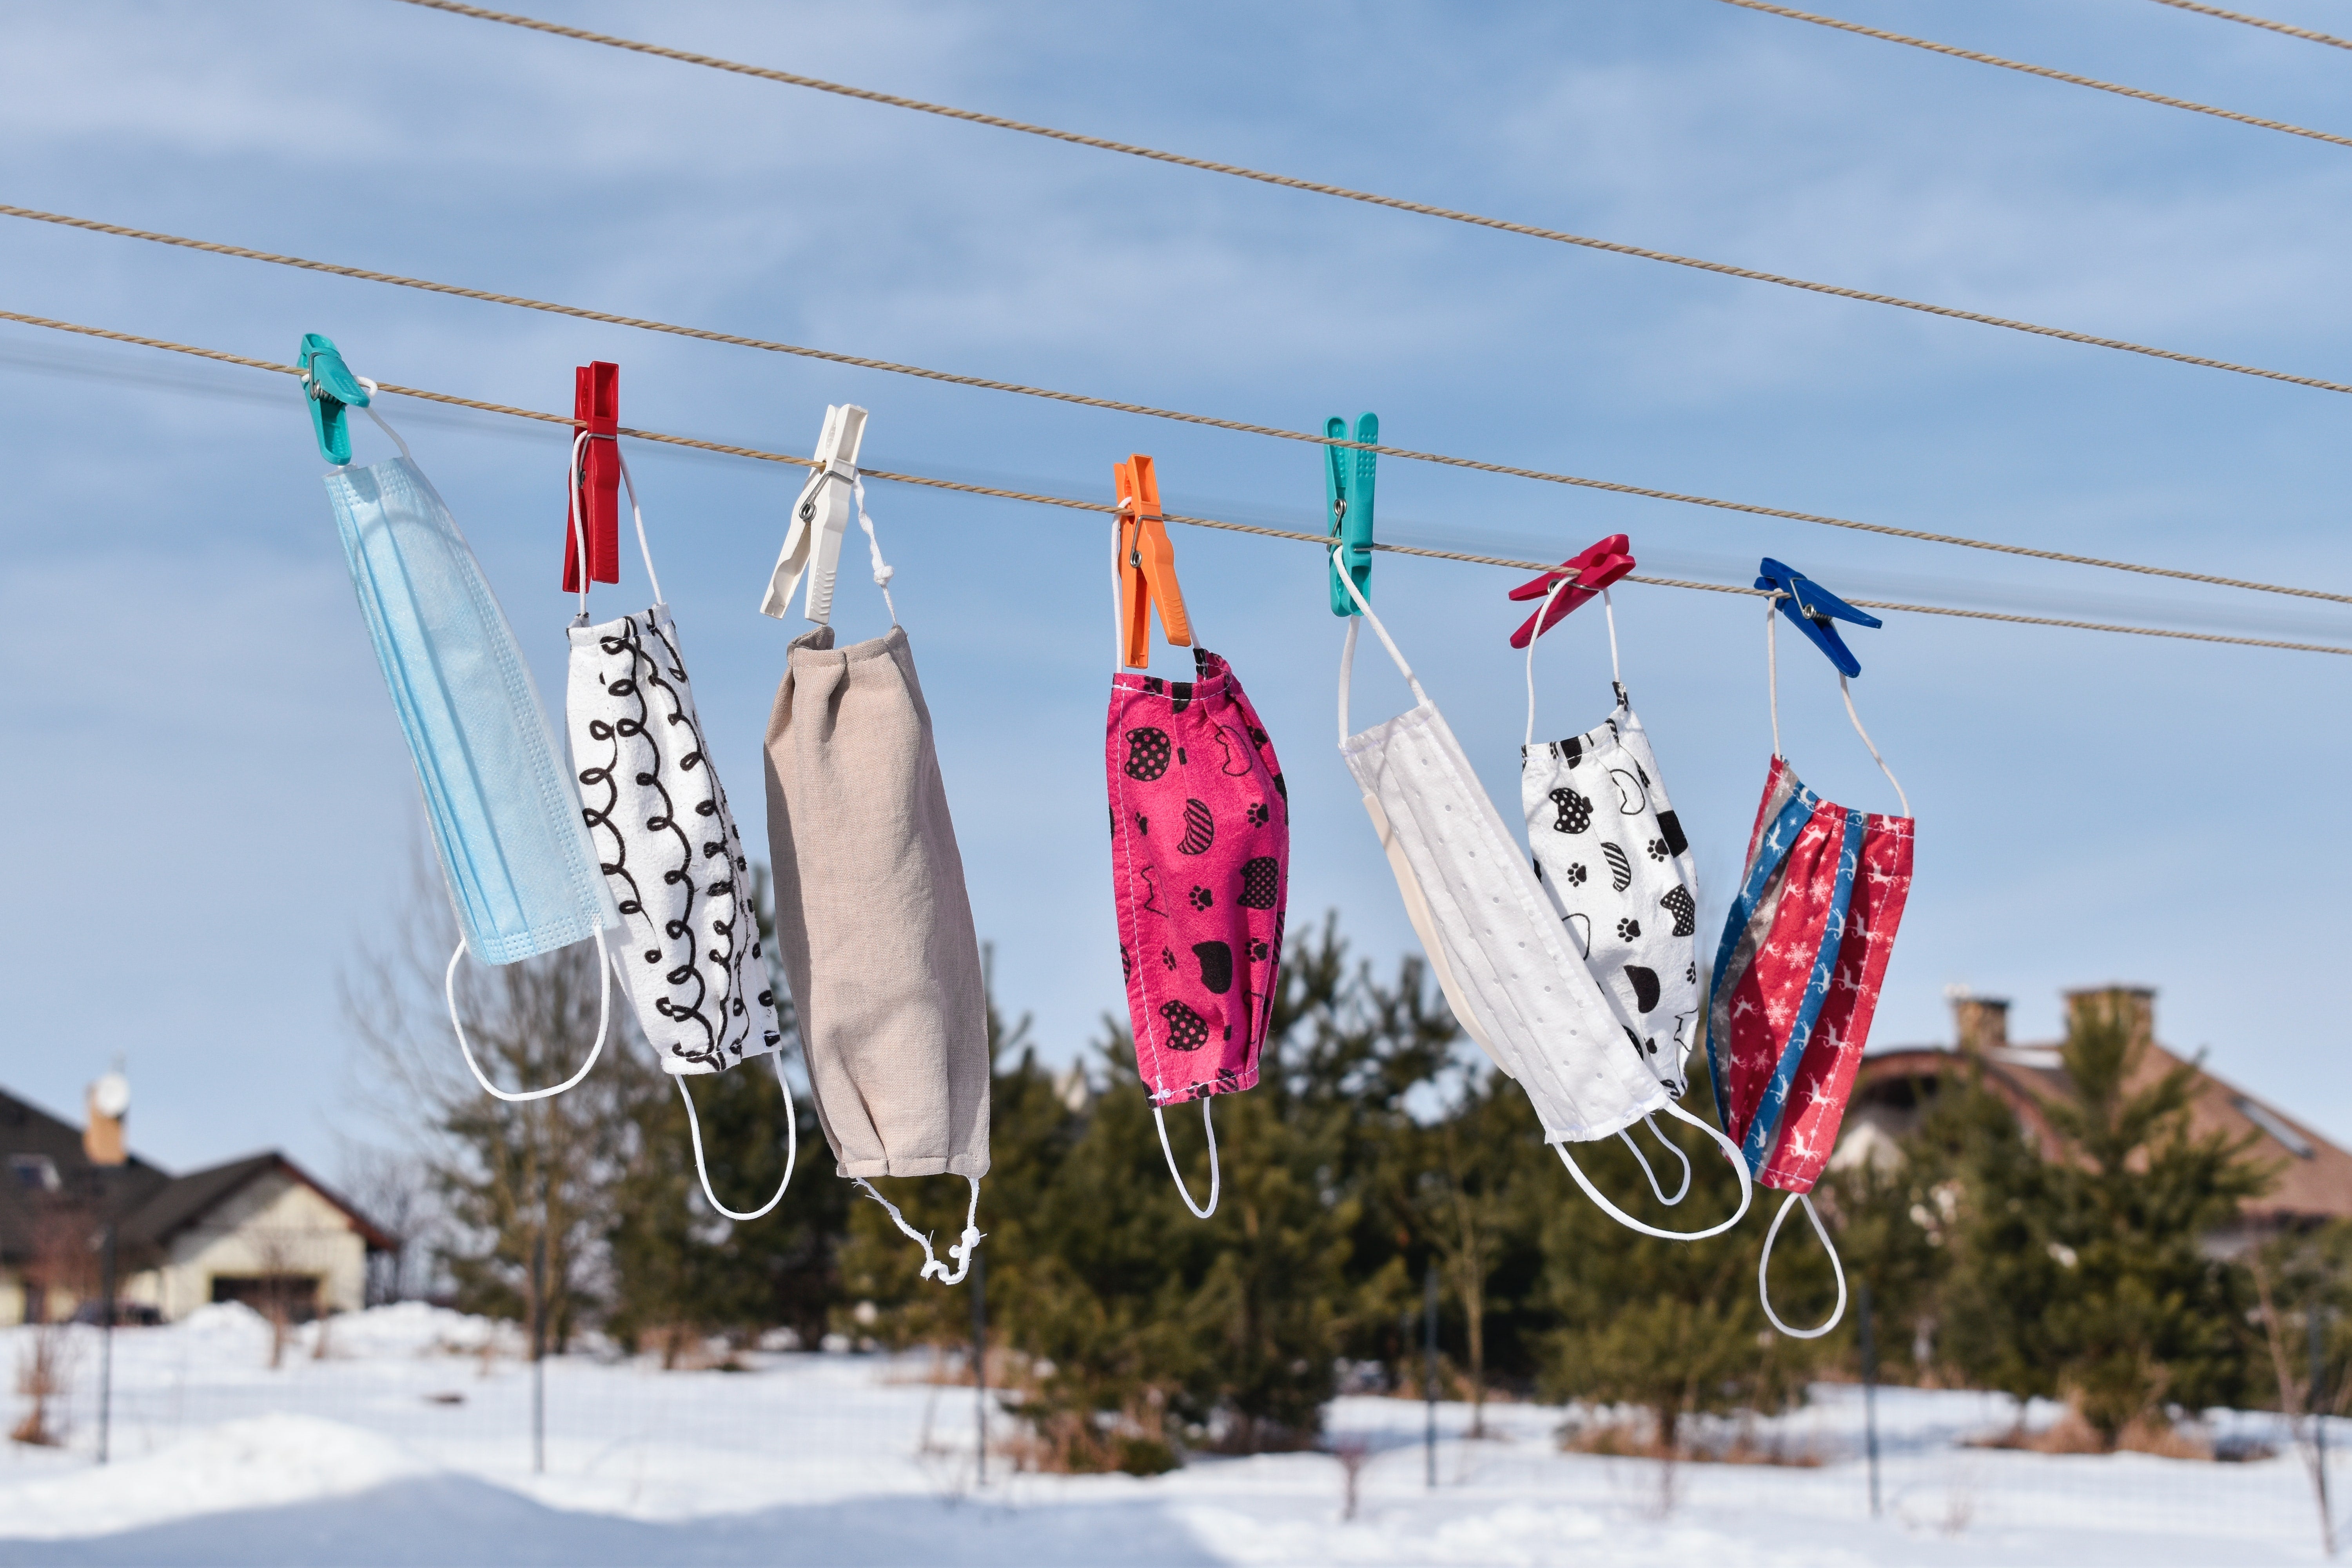 Masks in various colors and designs hanging on a clothesline outside in a snowy area